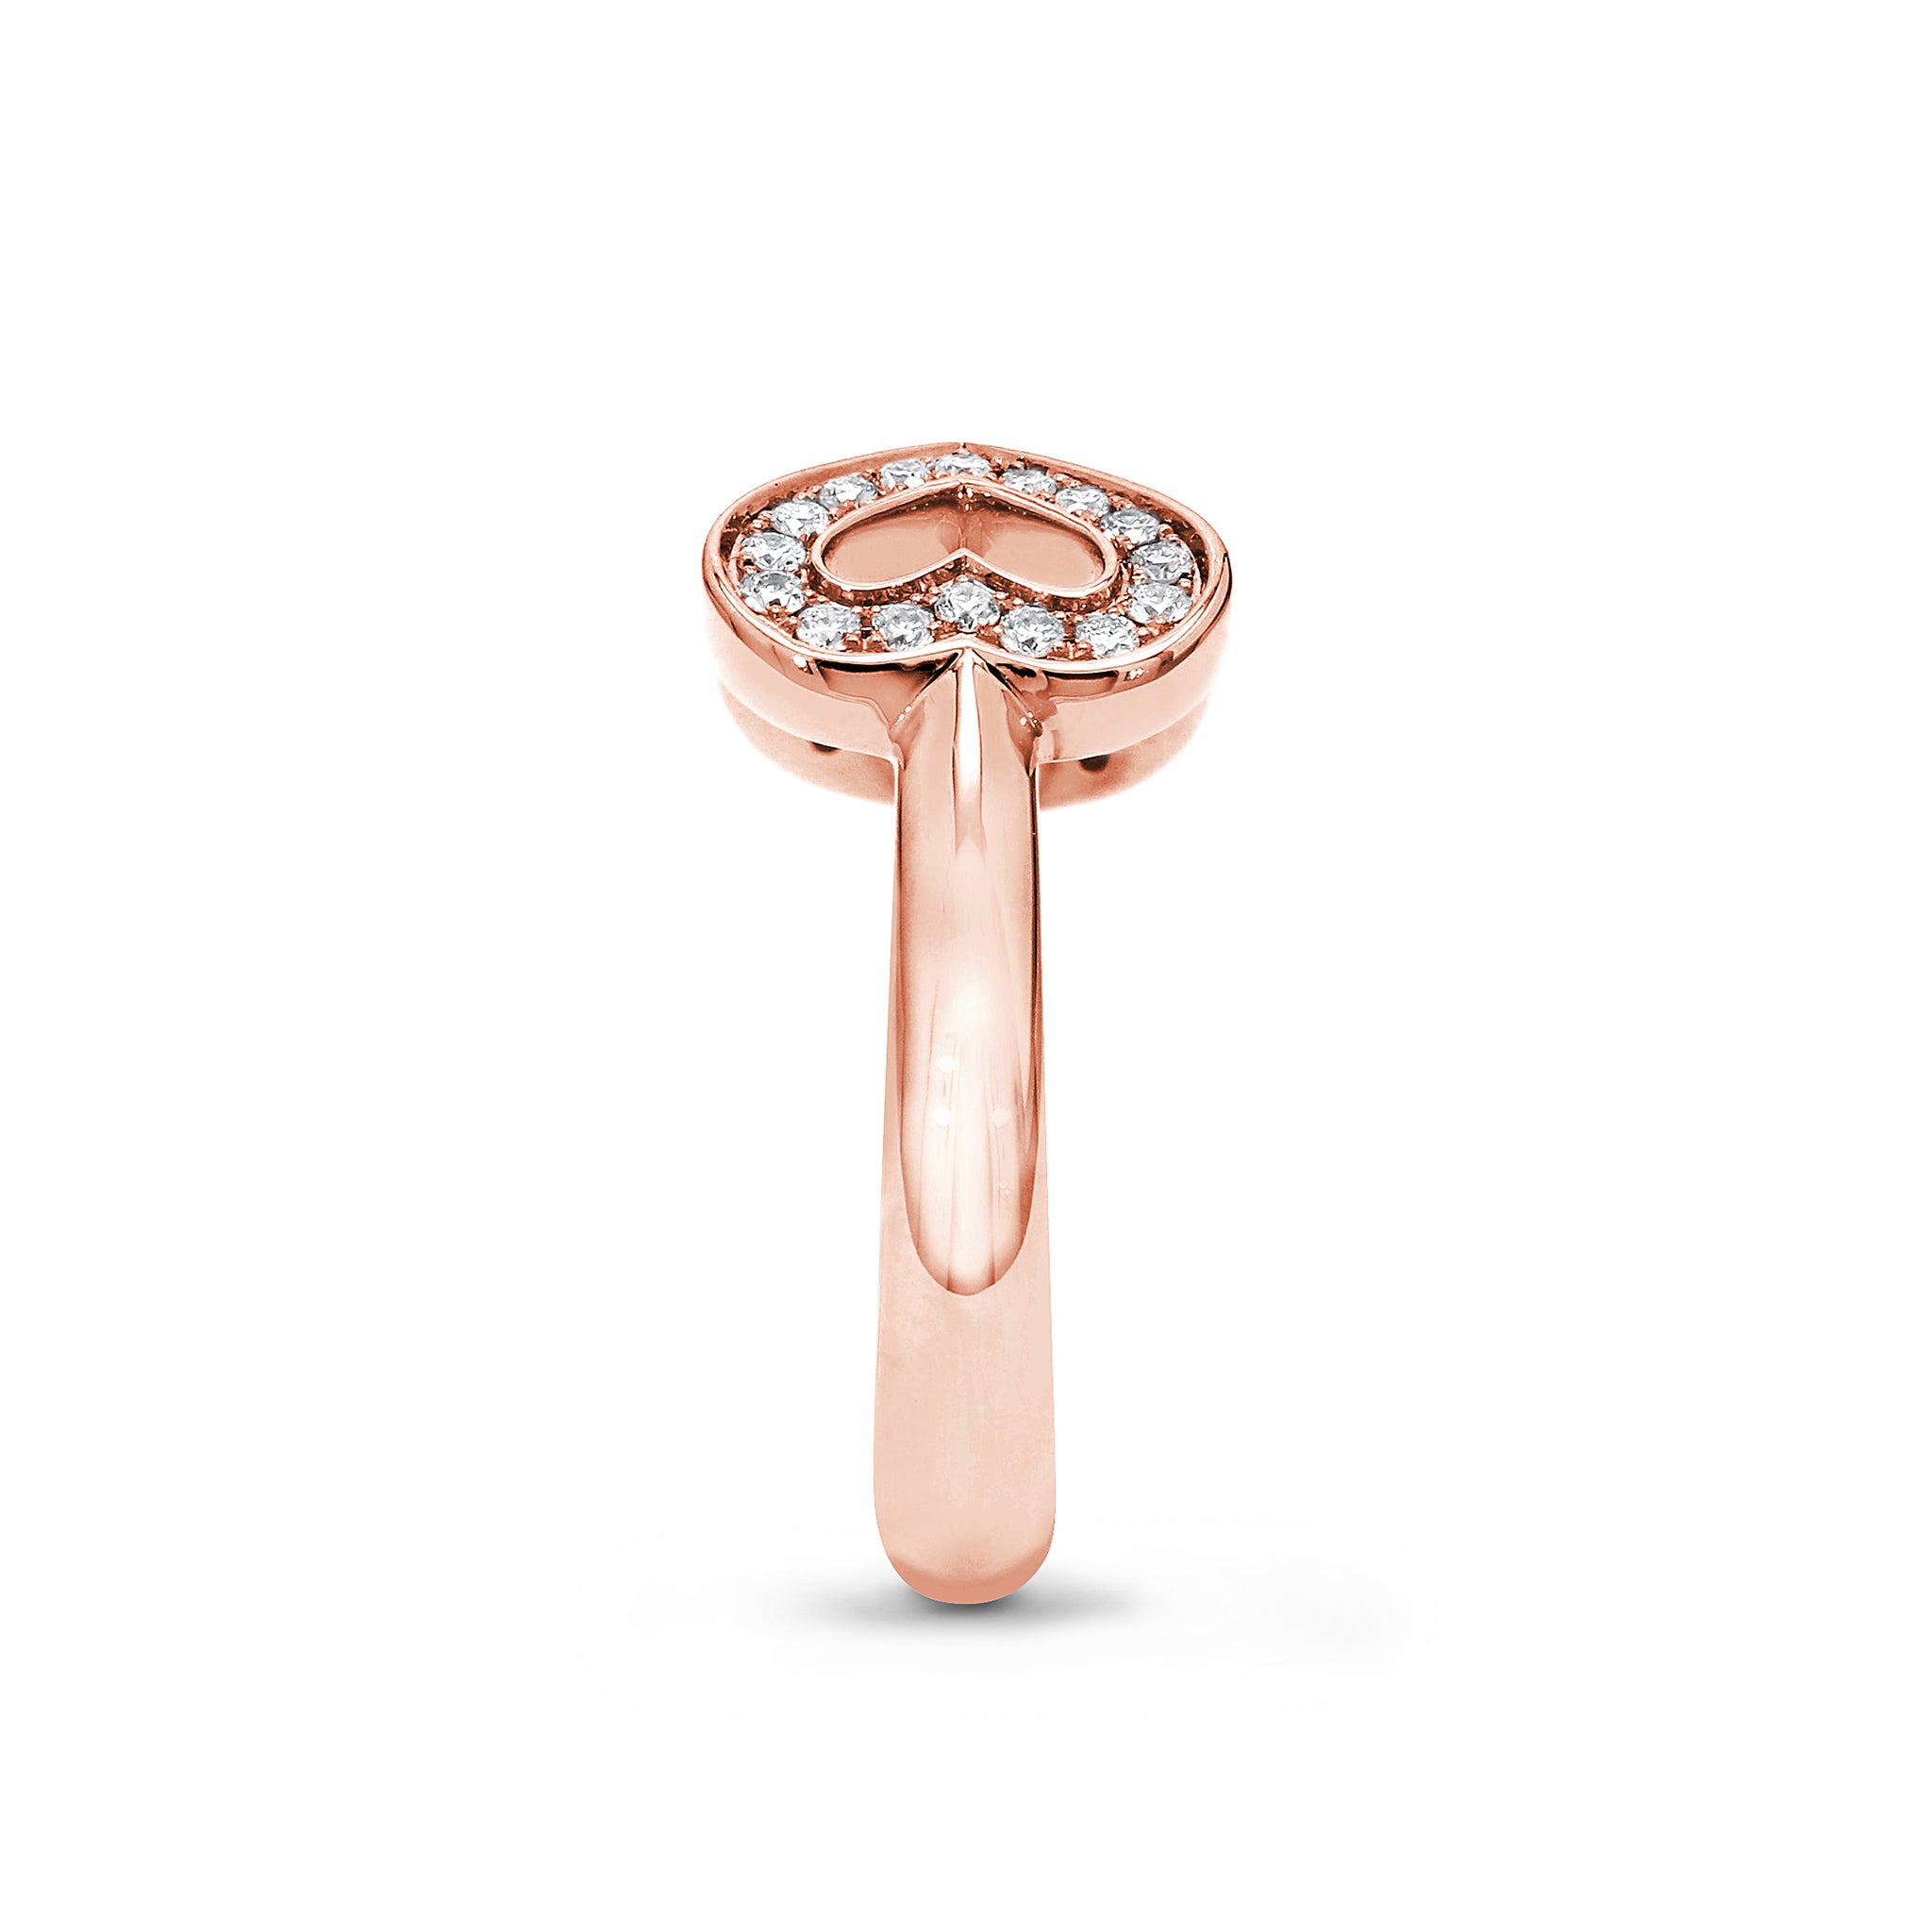 Shimansky - Two Hearts Open Diamond Pave Ring 0.20ct crafted in 18K Rose Gold